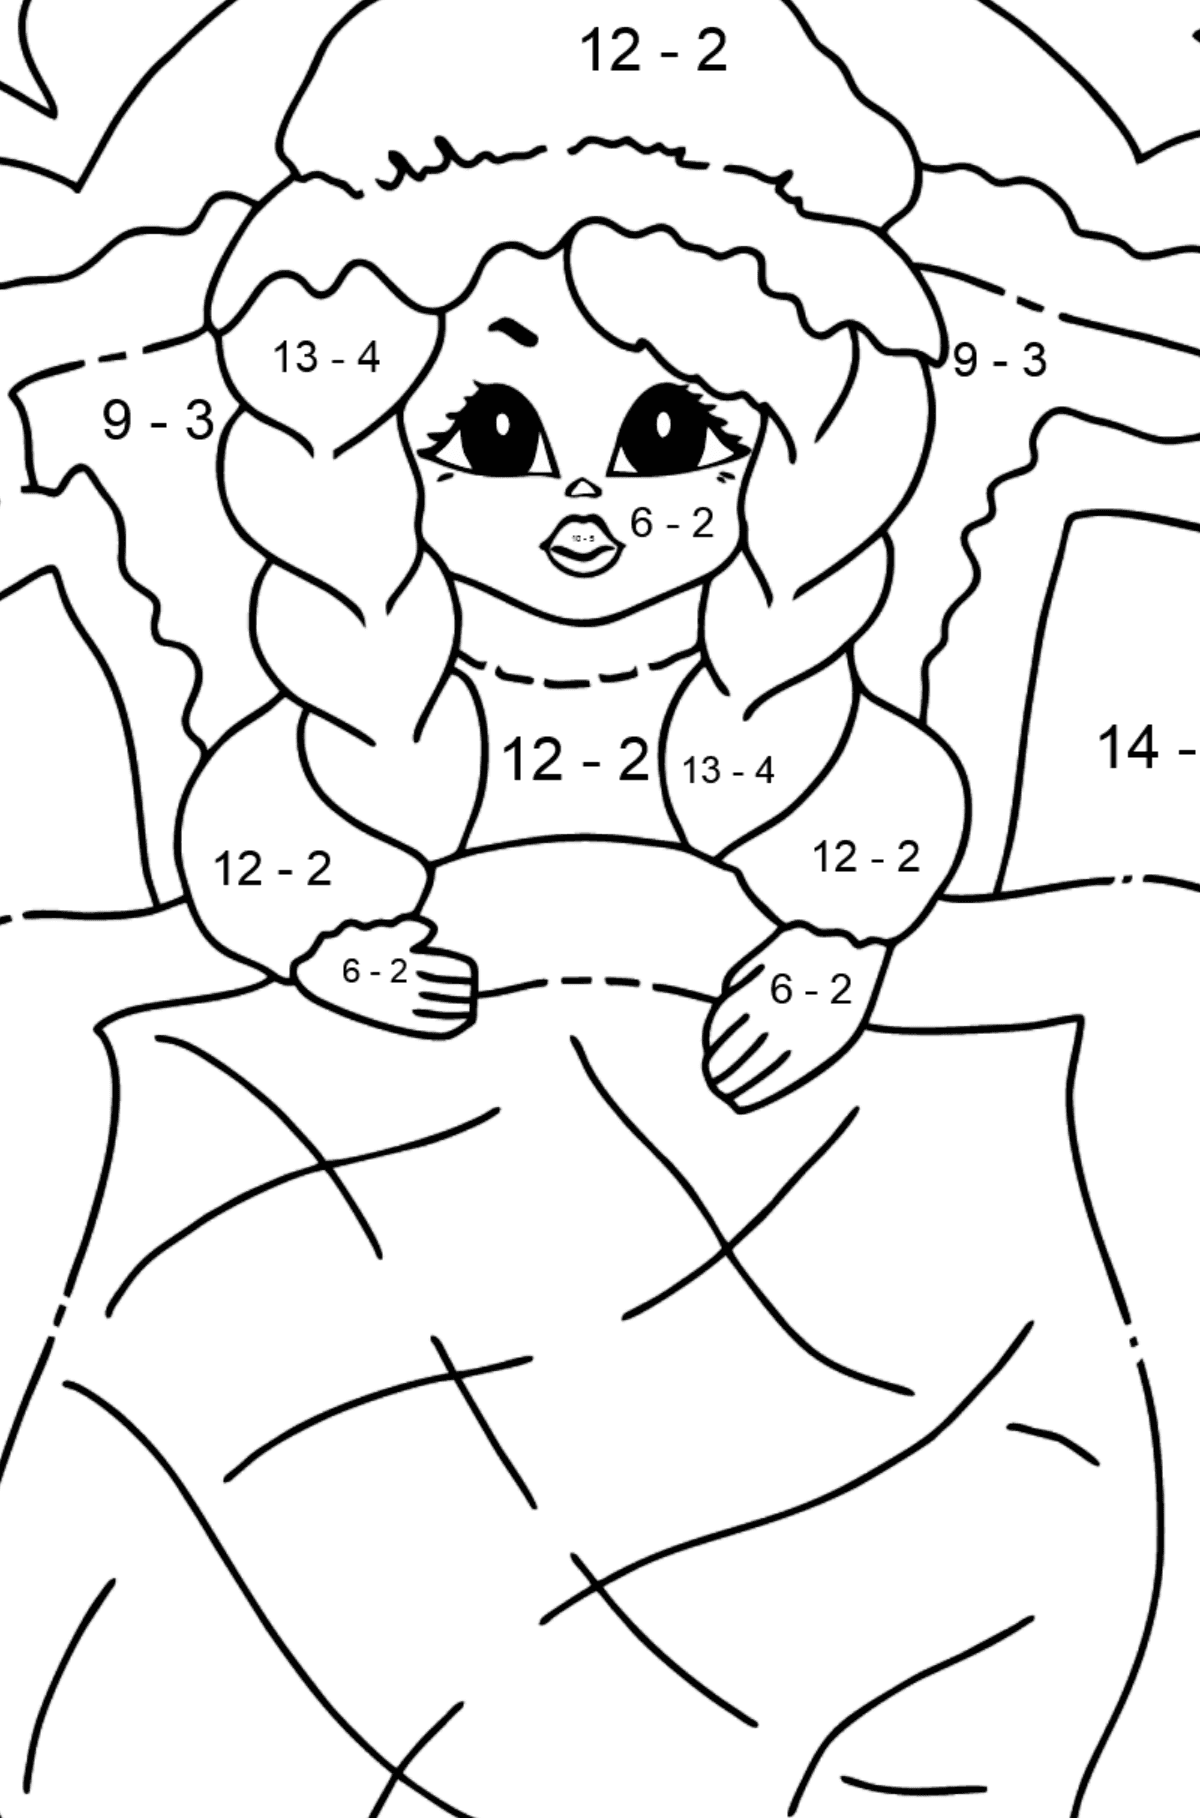 Coloring Picture - A Princess in Bed - Math Coloring - Subtraction for Kids